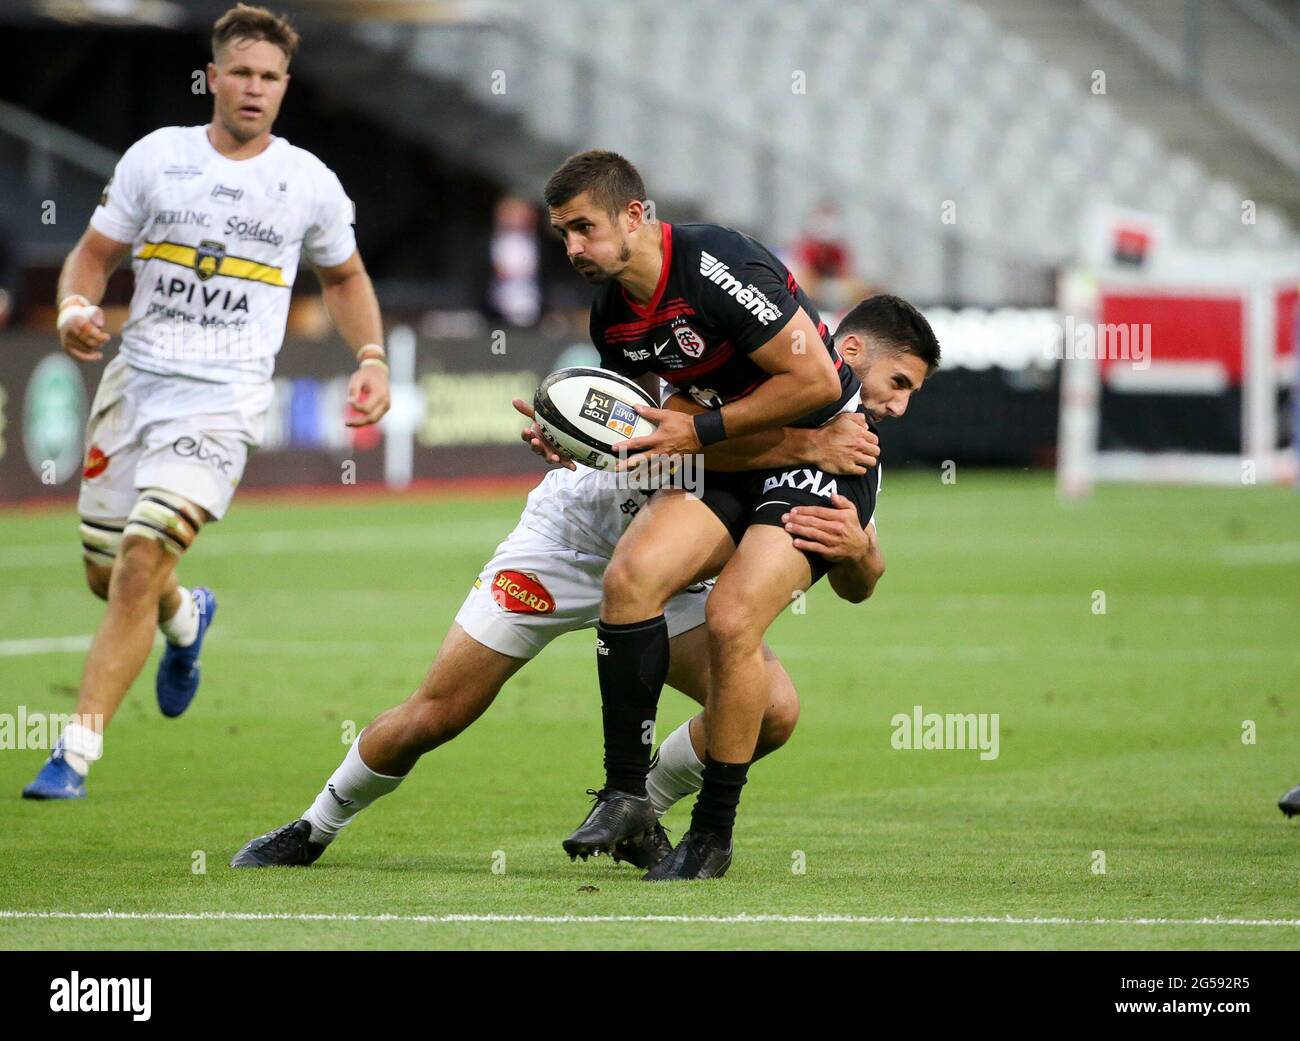 Paris, France. 25th June, 2021. Thomas Ramos of Stade Toulousain during the  French rugby championship Top 14 Final between Stade Toulousain (Toulouse)  and Stade Rochelais (La Rochelle) on June 25, 2021 at